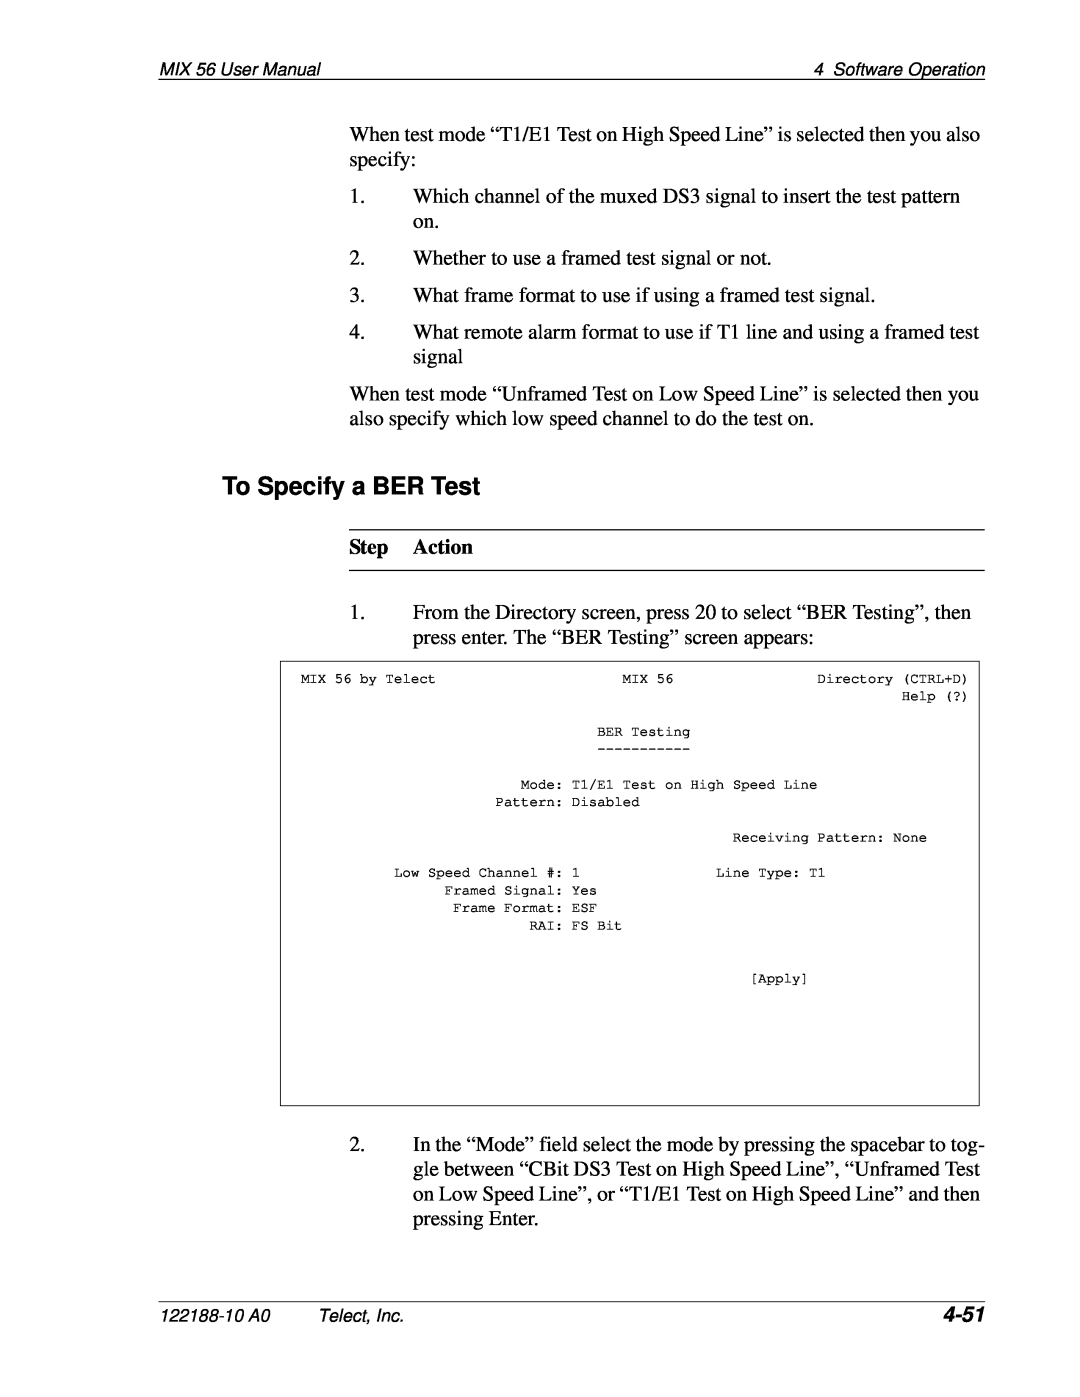 Telect MIX 56 user manual To Specify a BER Test, 4-51, Step Action 